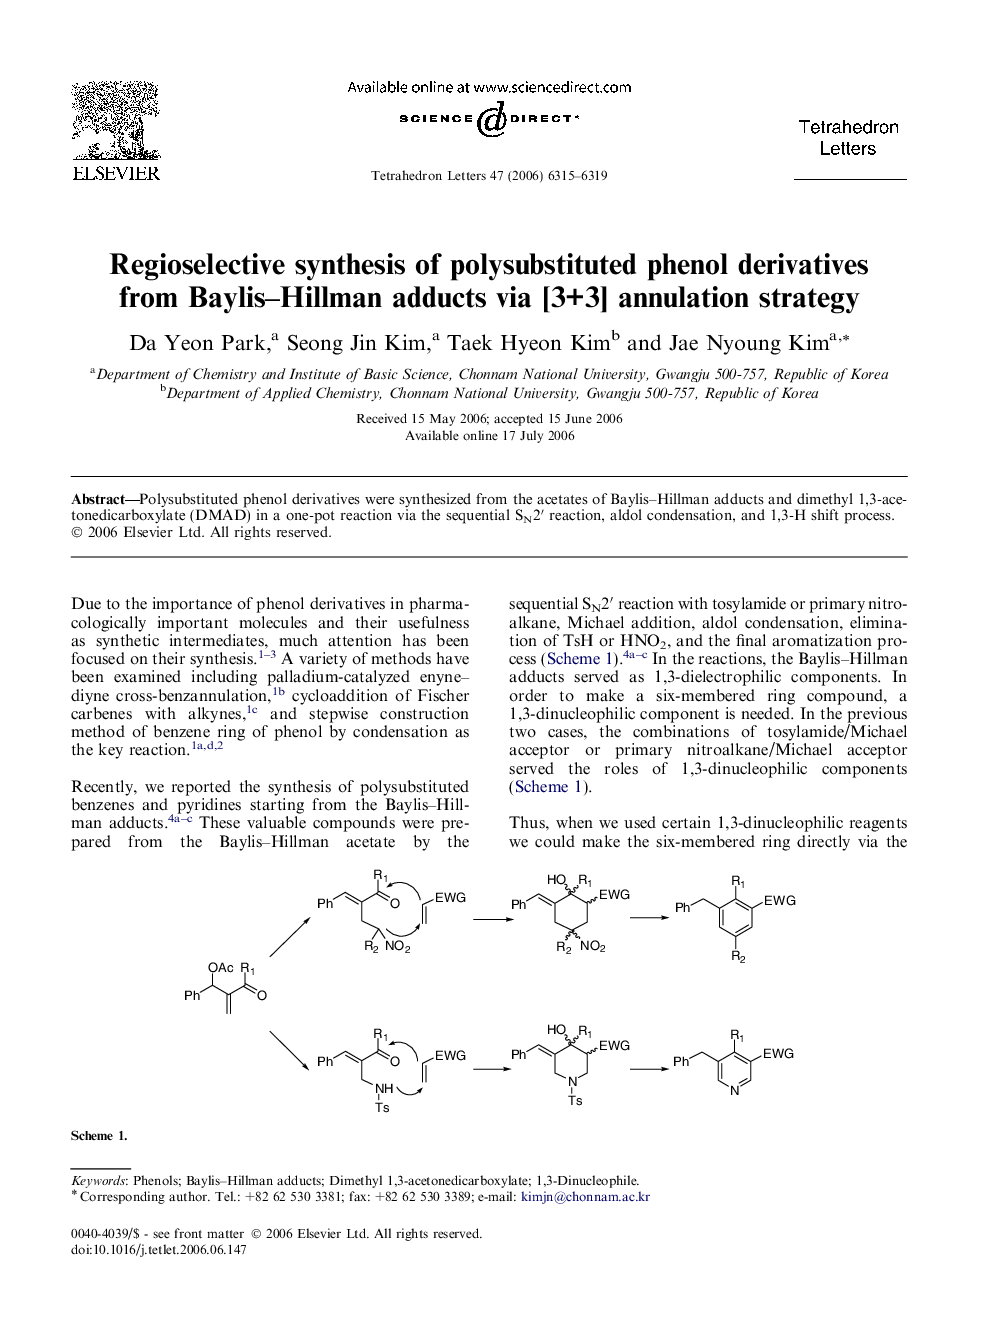 Regioselective synthesis of polysubstituted phenol derivatives from Baylis-Hillman adducts via [3+3] annulation strategy